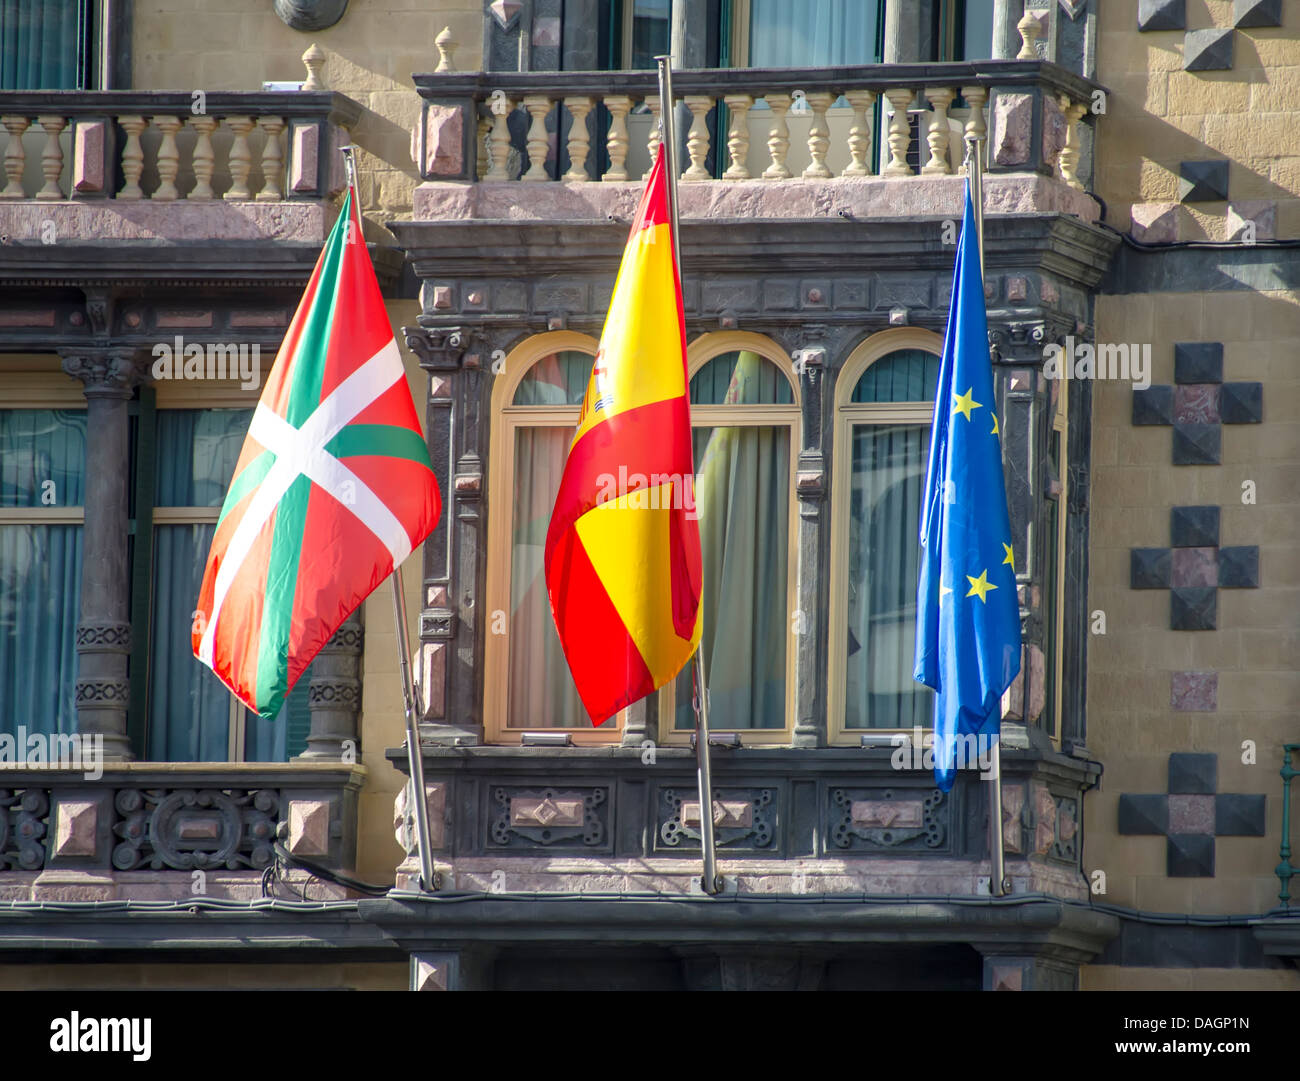 Flags of Euskadi, Spain and European Union waving in the facade of a building Stock Photo